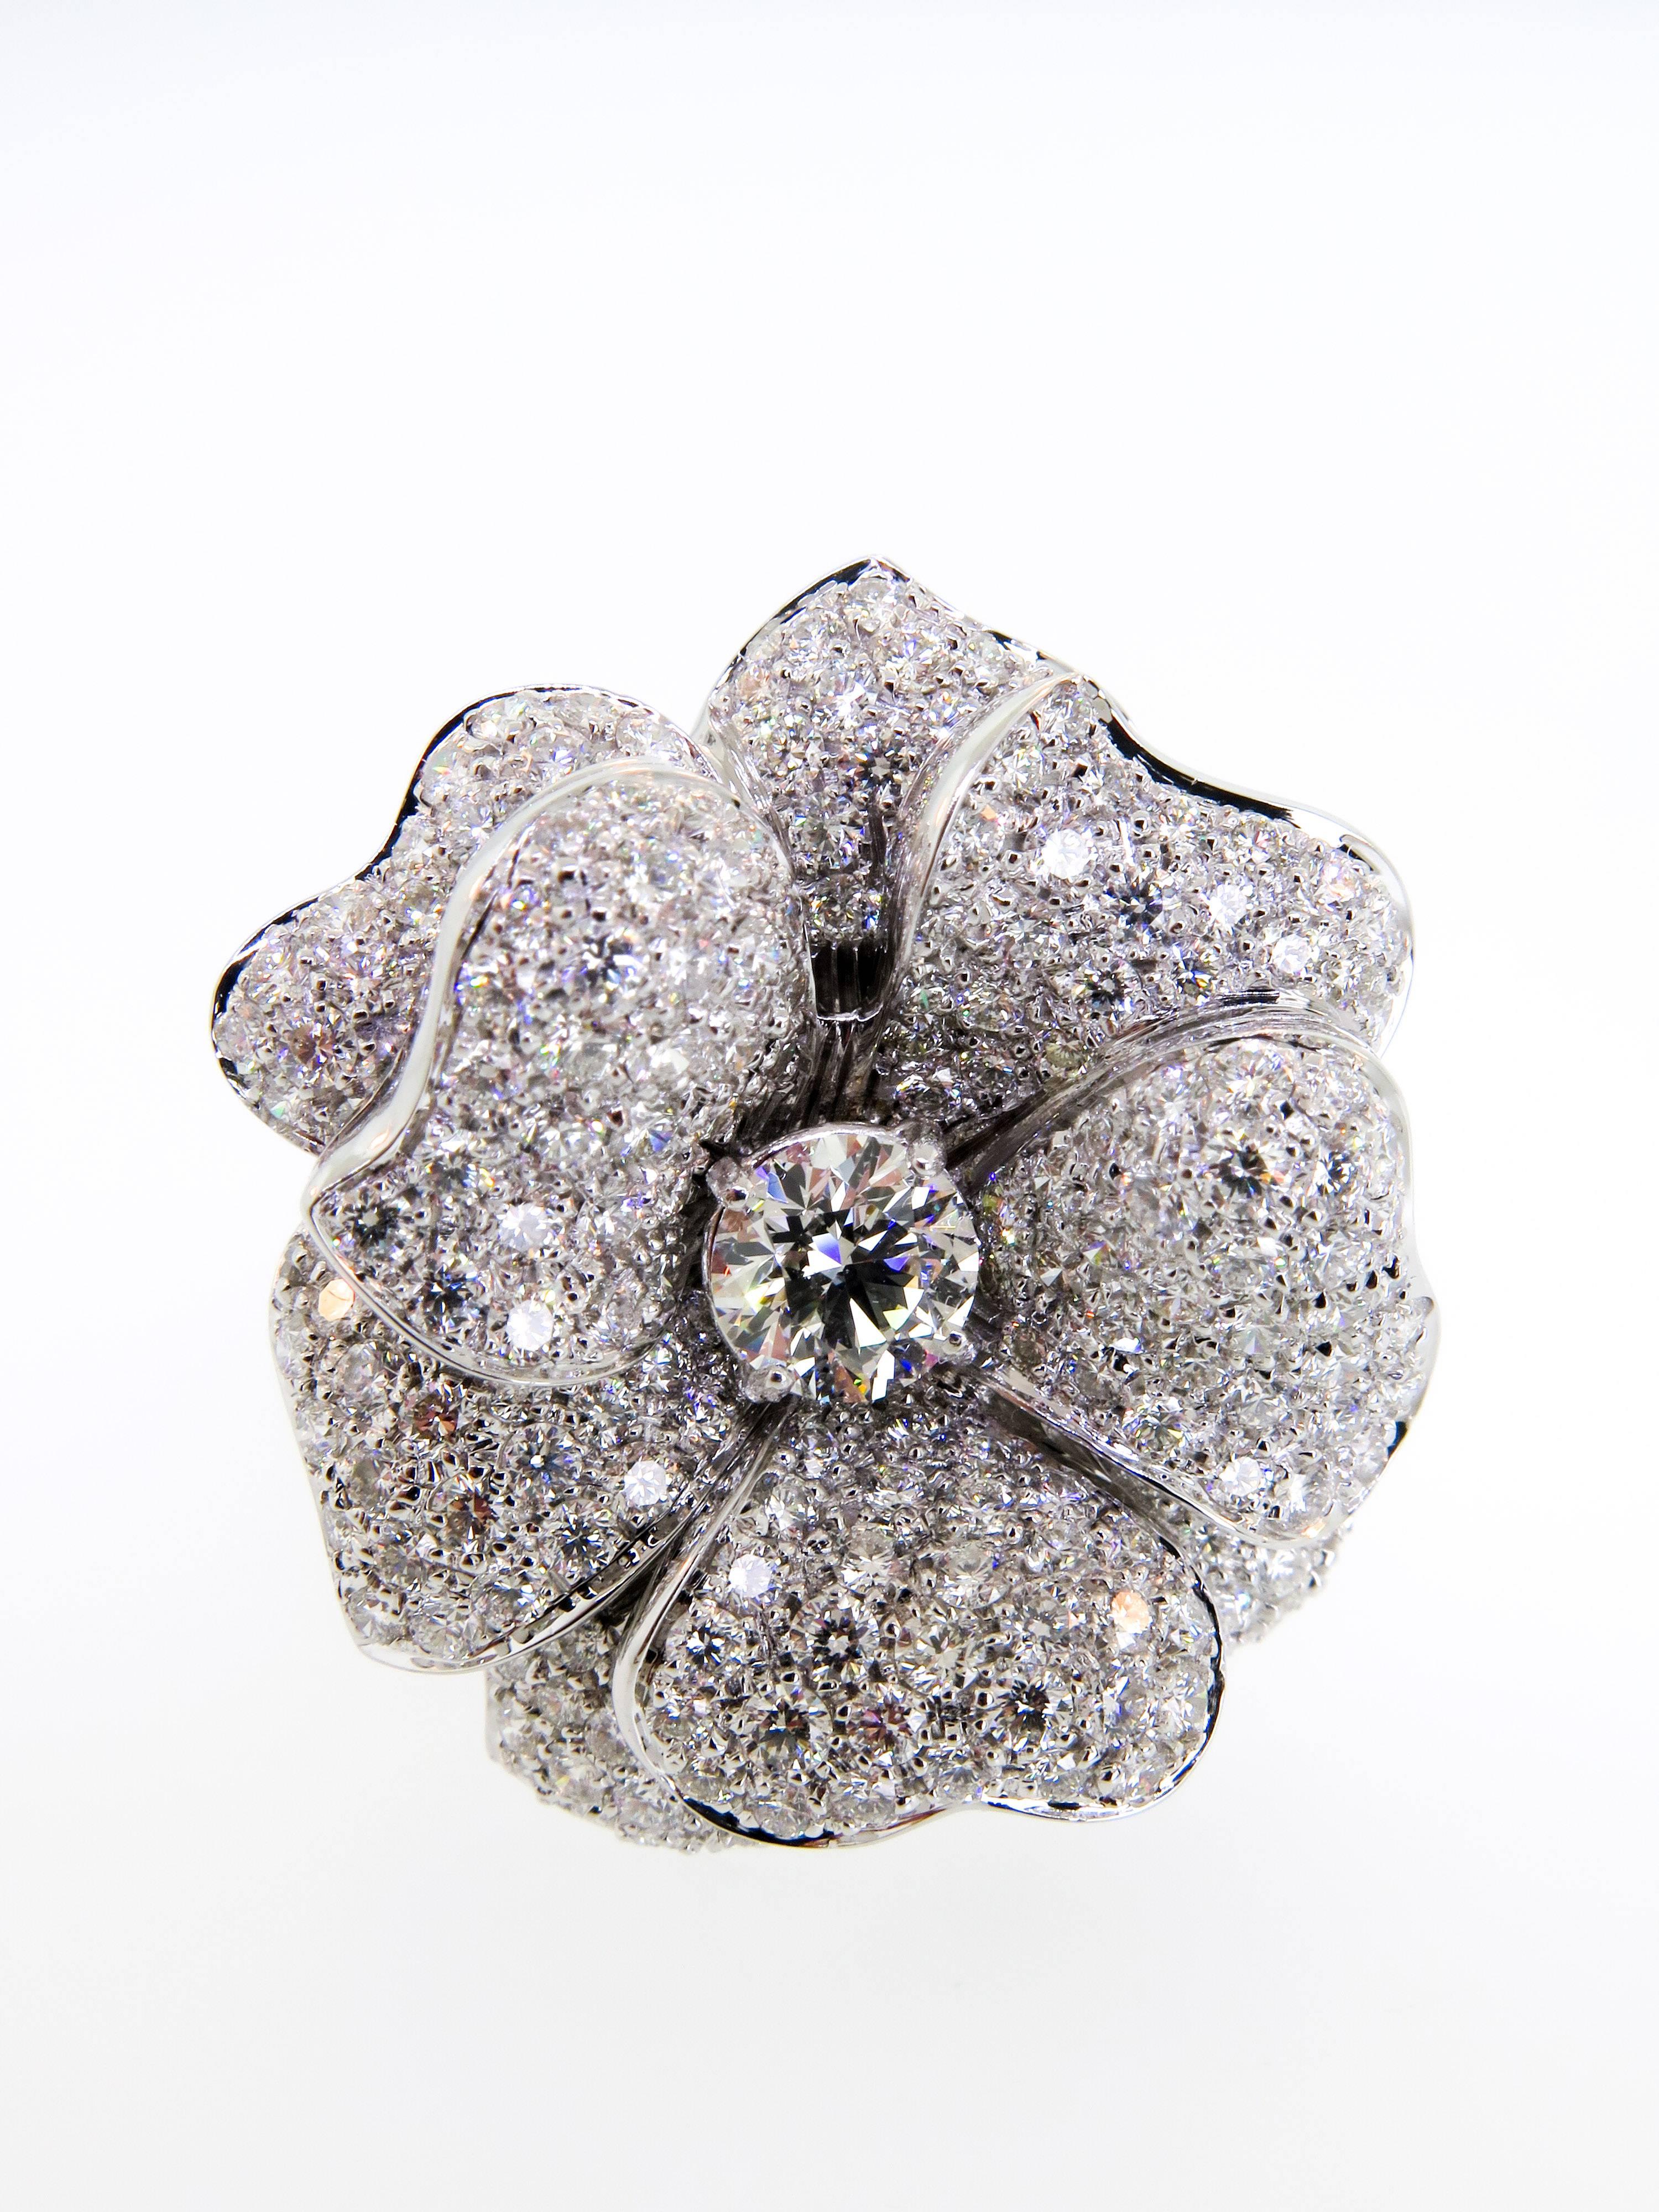 This charming Pavé diamond flower ring is centered by a larger round diamond weighing approximately 1.00ct  H/VS1 handcrafted in 18K white gold. The Diamond flower motif measures approximately 32mm in diameter (1.25 inches). Size 8.5